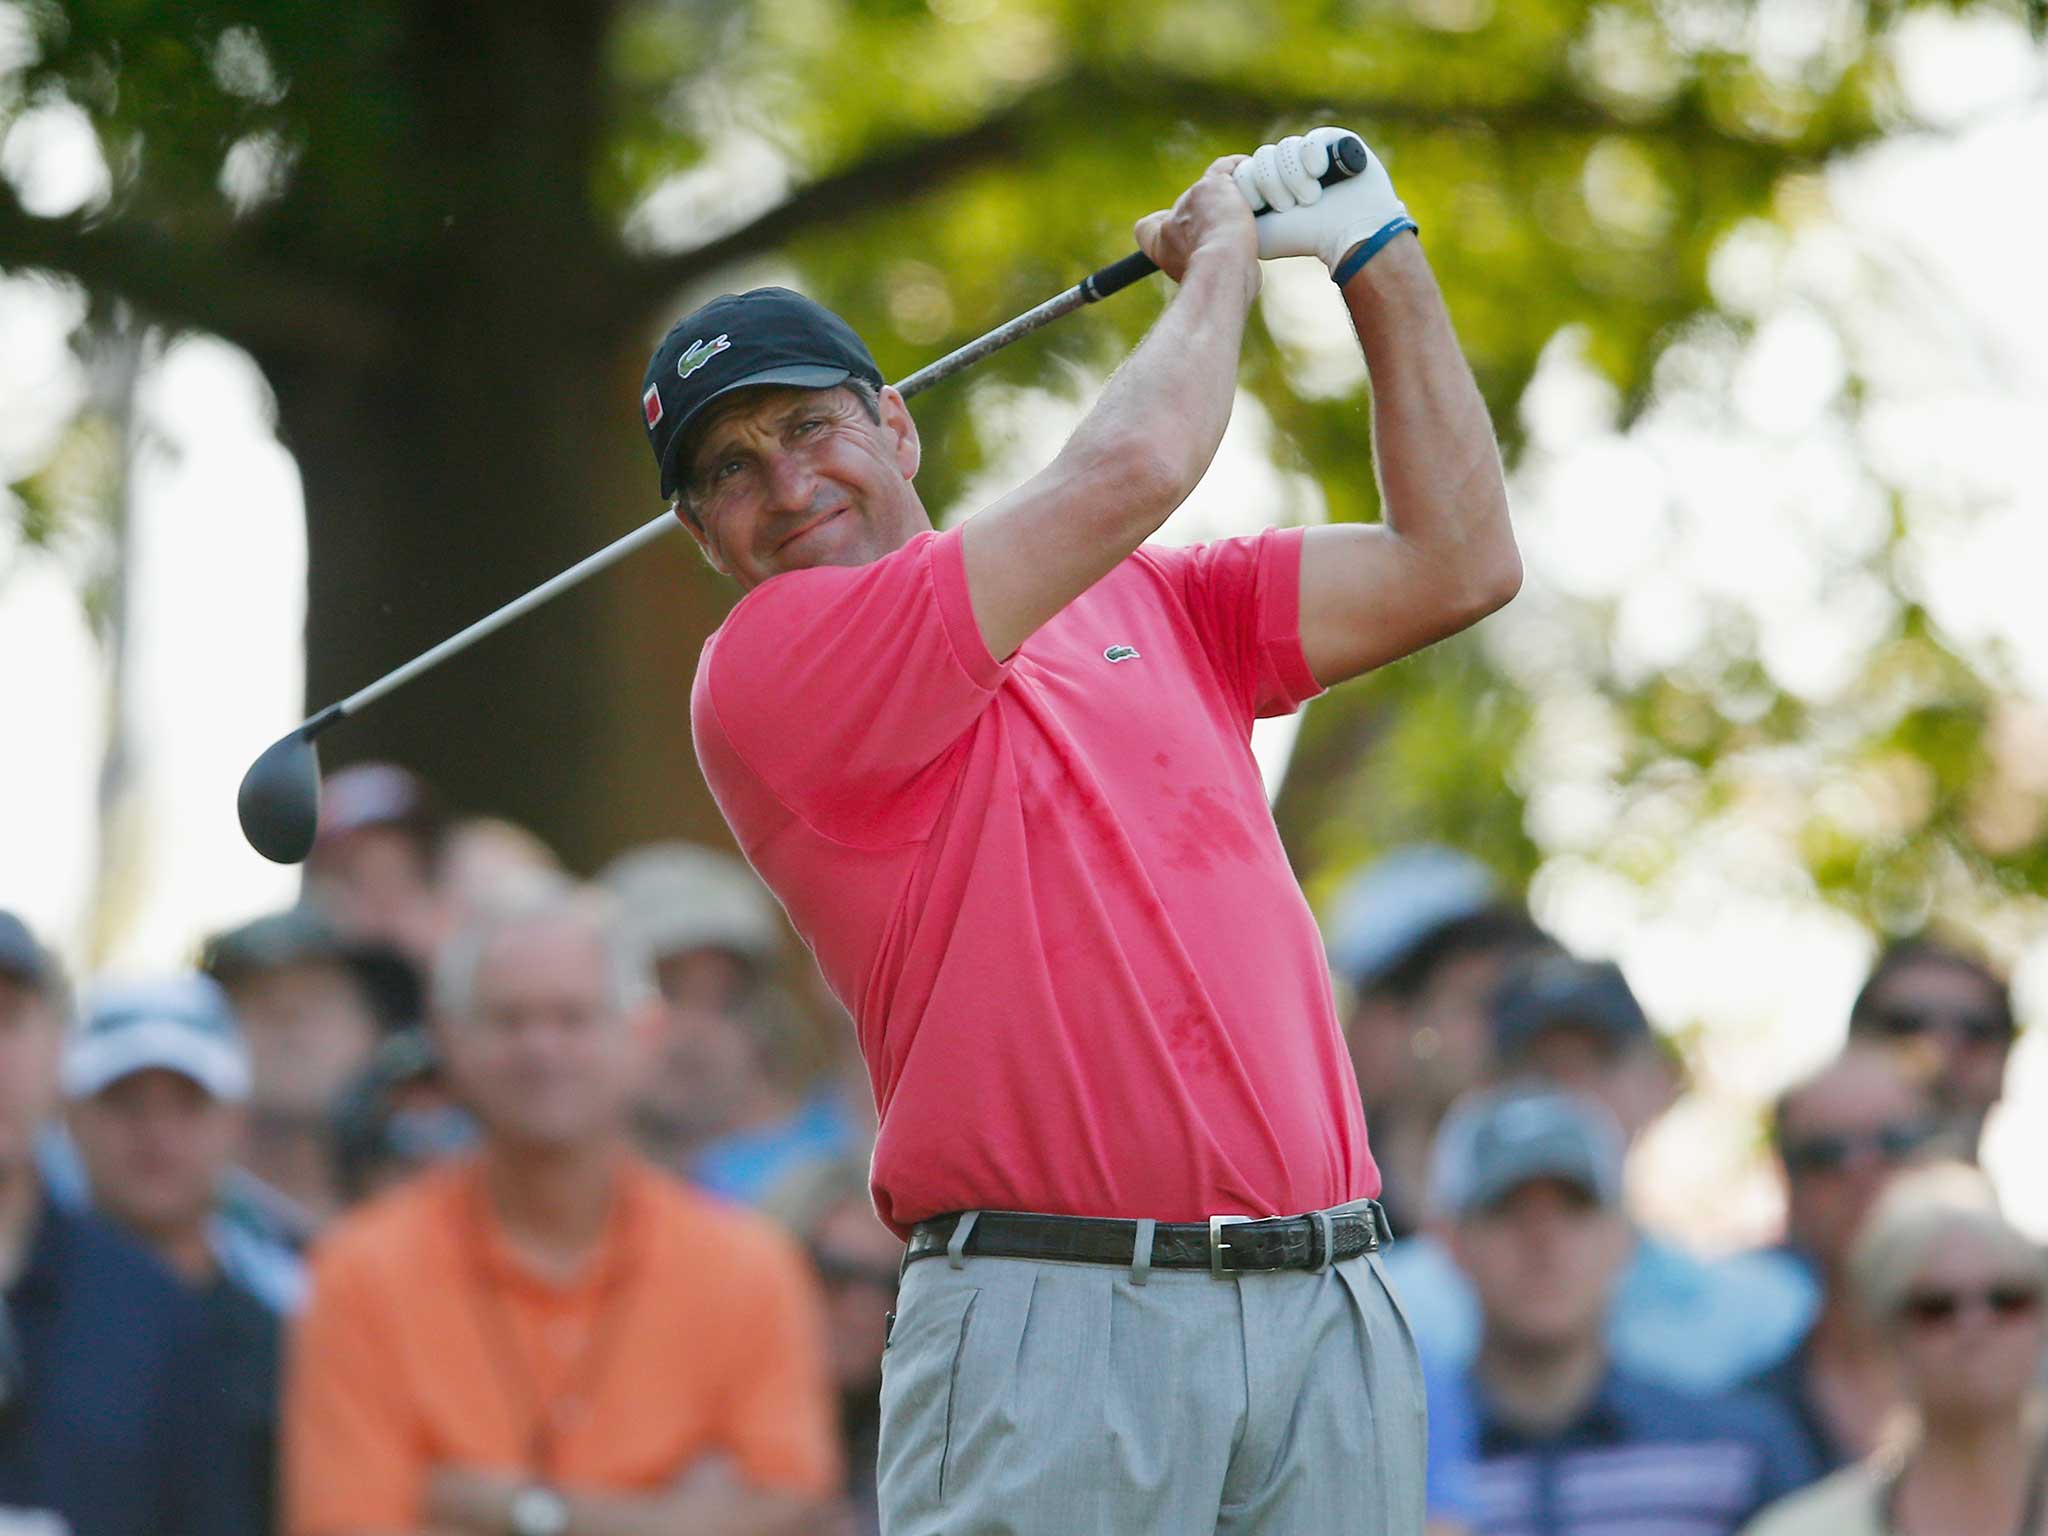 Jose Maria Olazabal is set for a return to golf